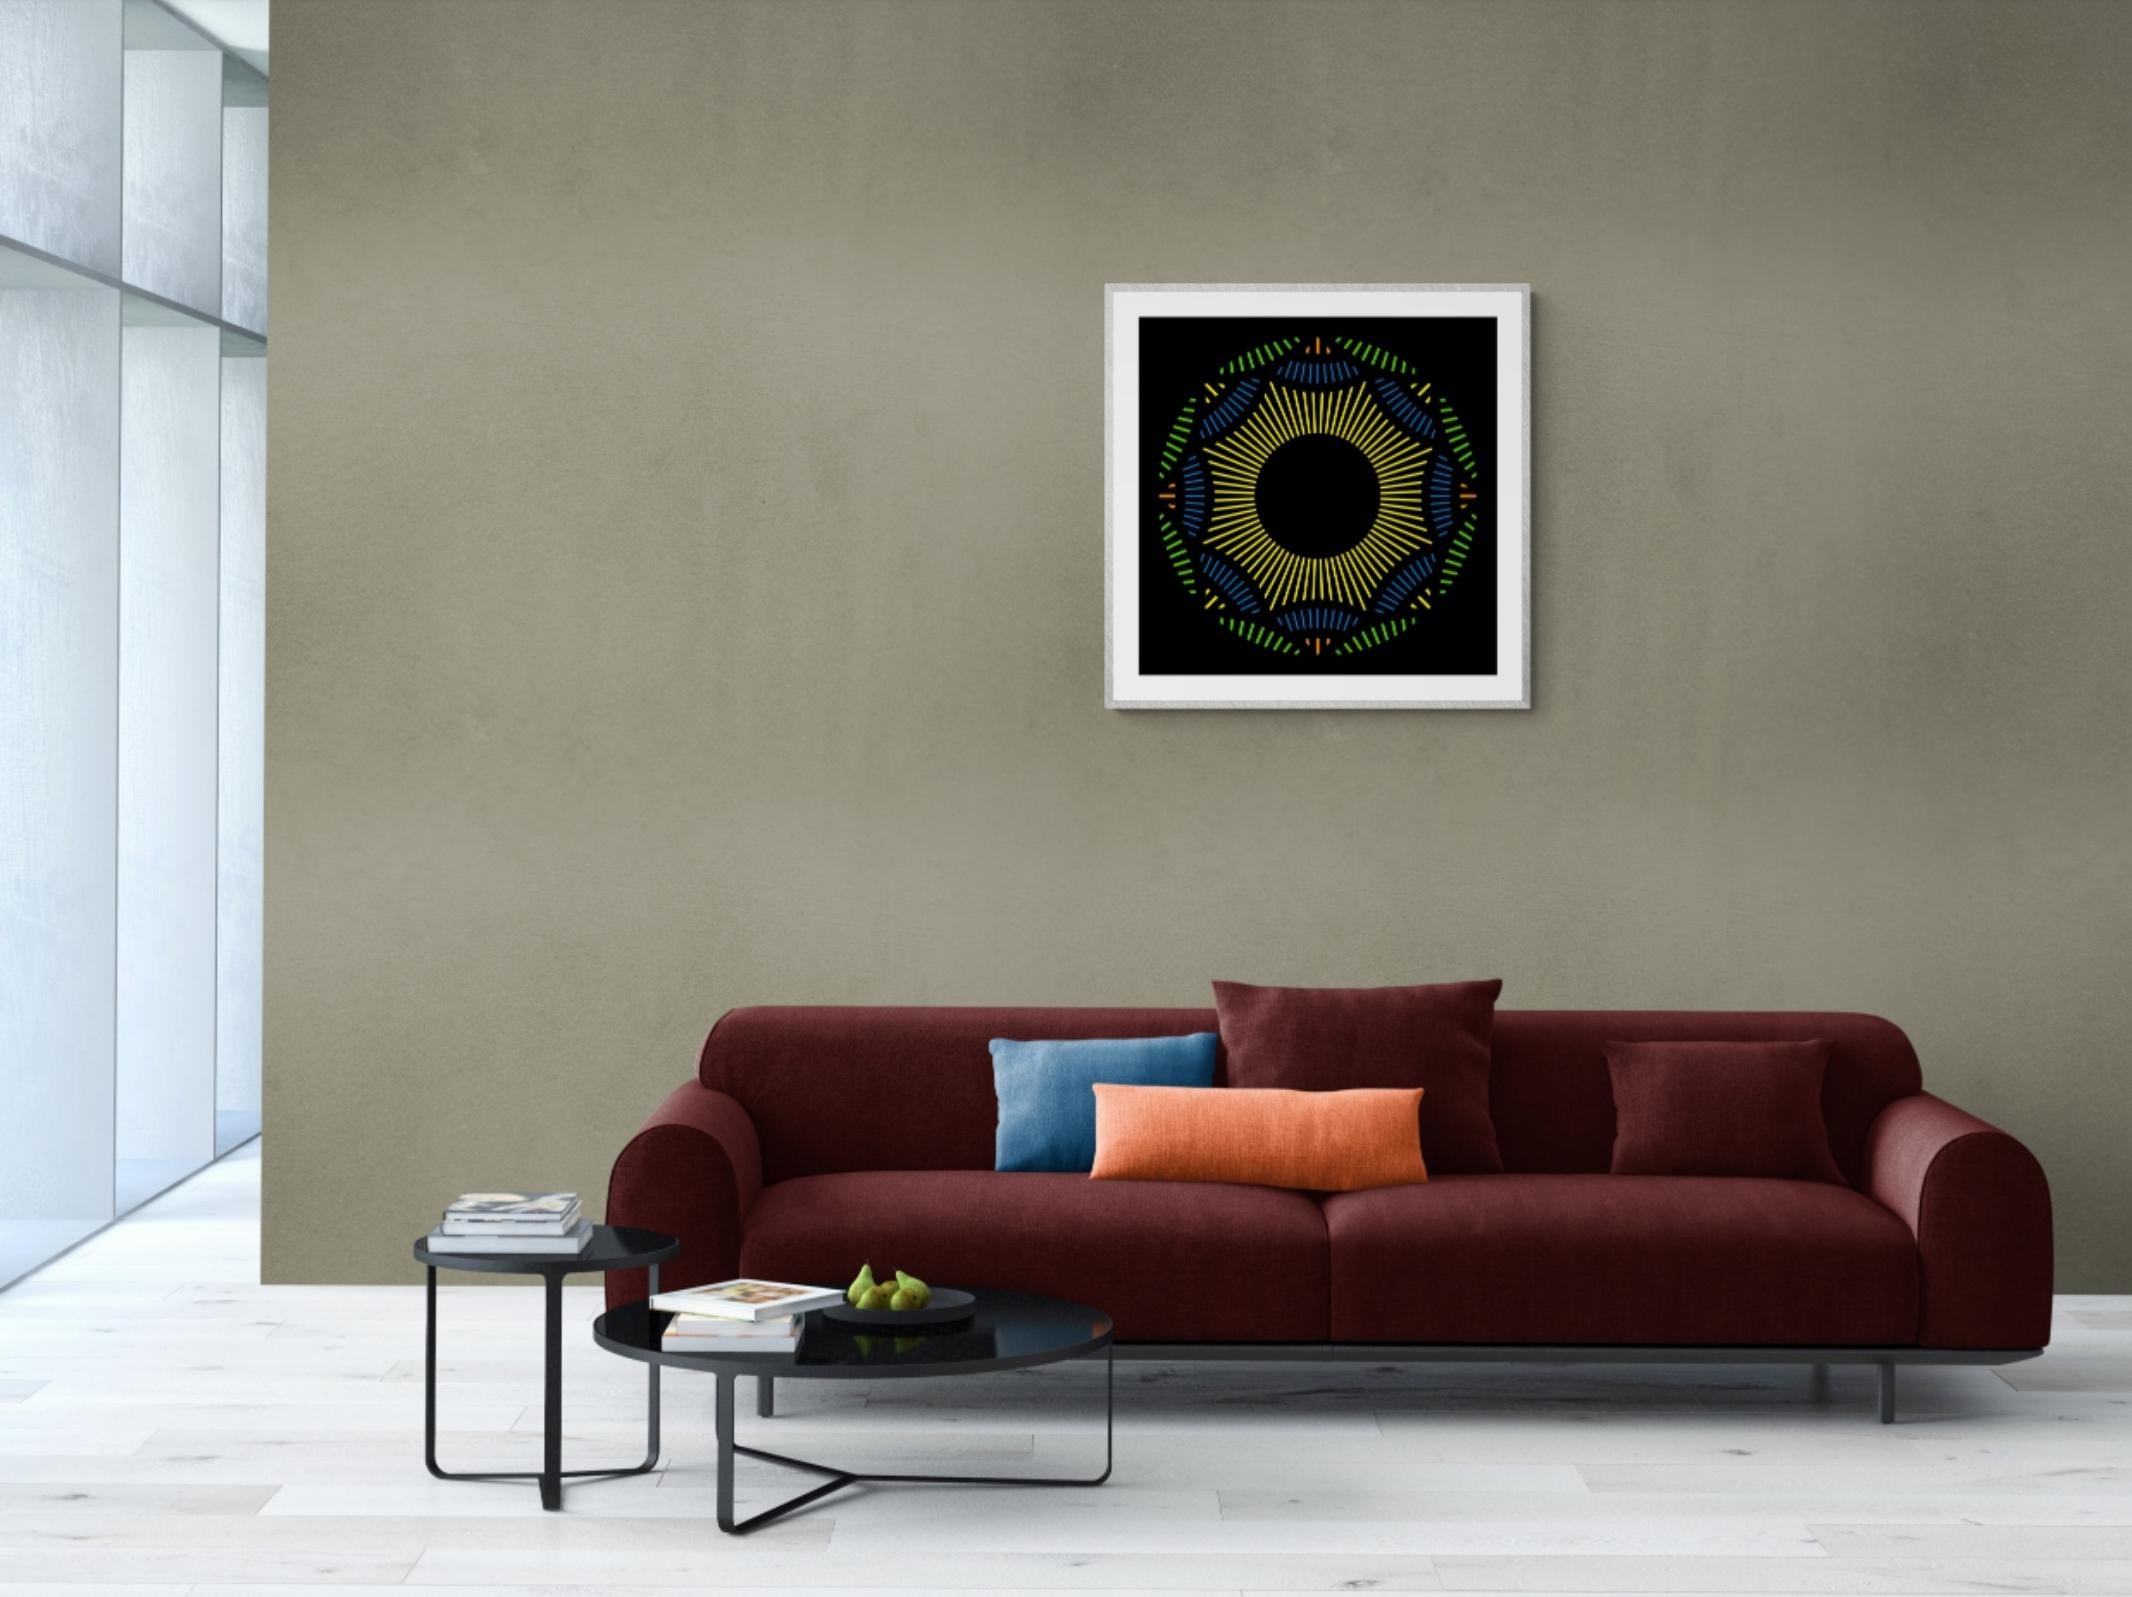 Nebulosa 19 - Black Abstract Print by Julio Campos